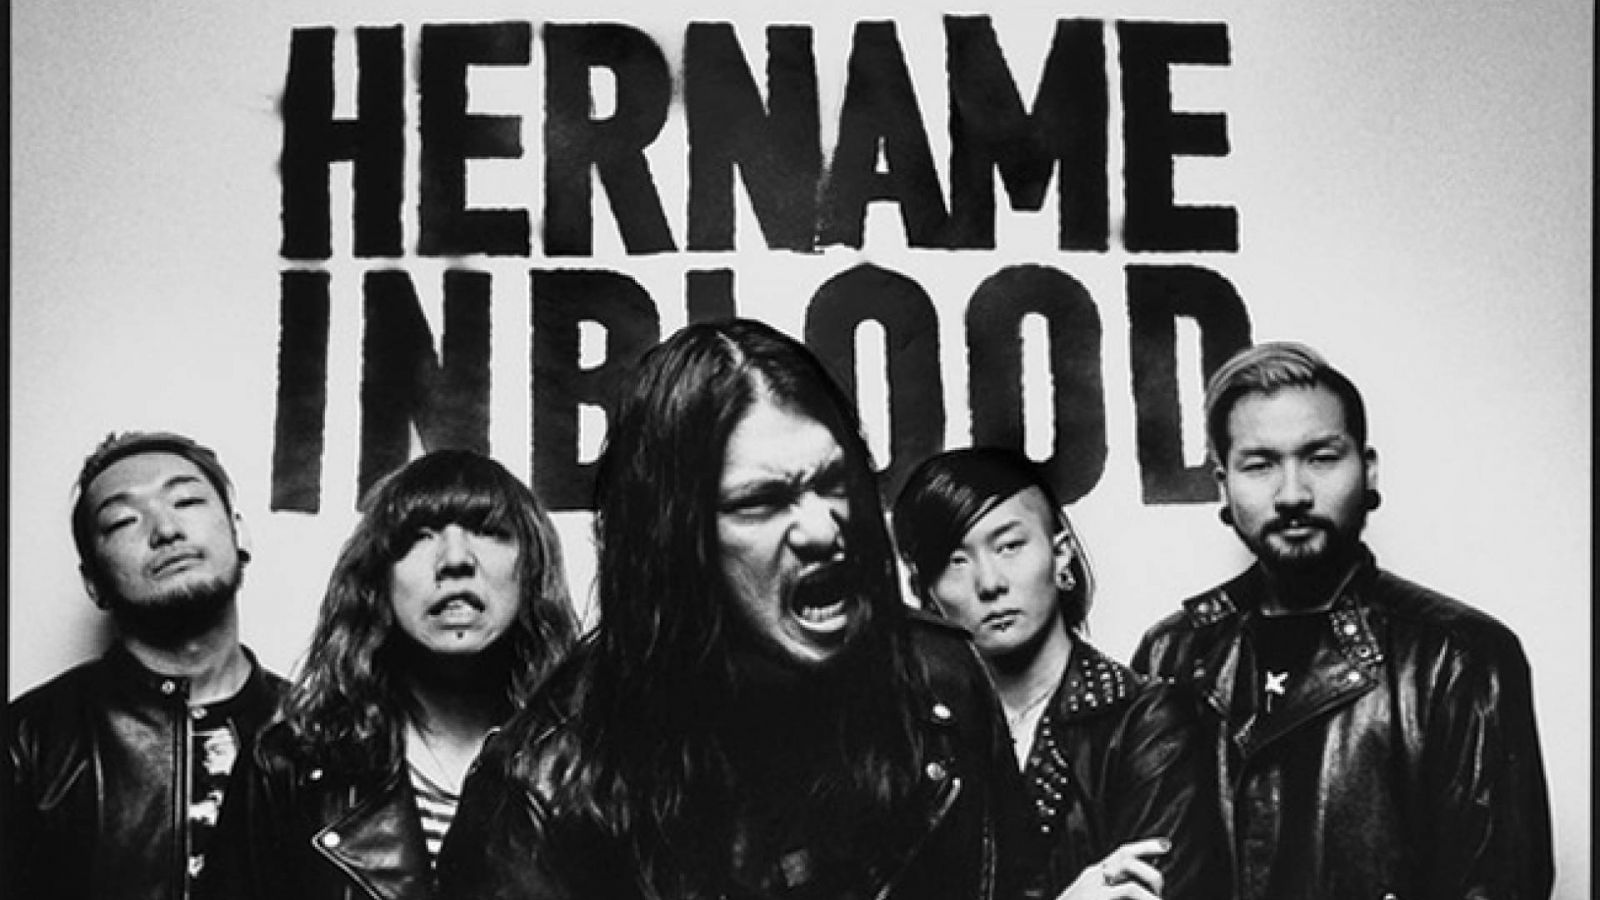 New Drummer Joins HER NAME IN BLOOD © HER NAME IN BLOOD. All rights reserved.